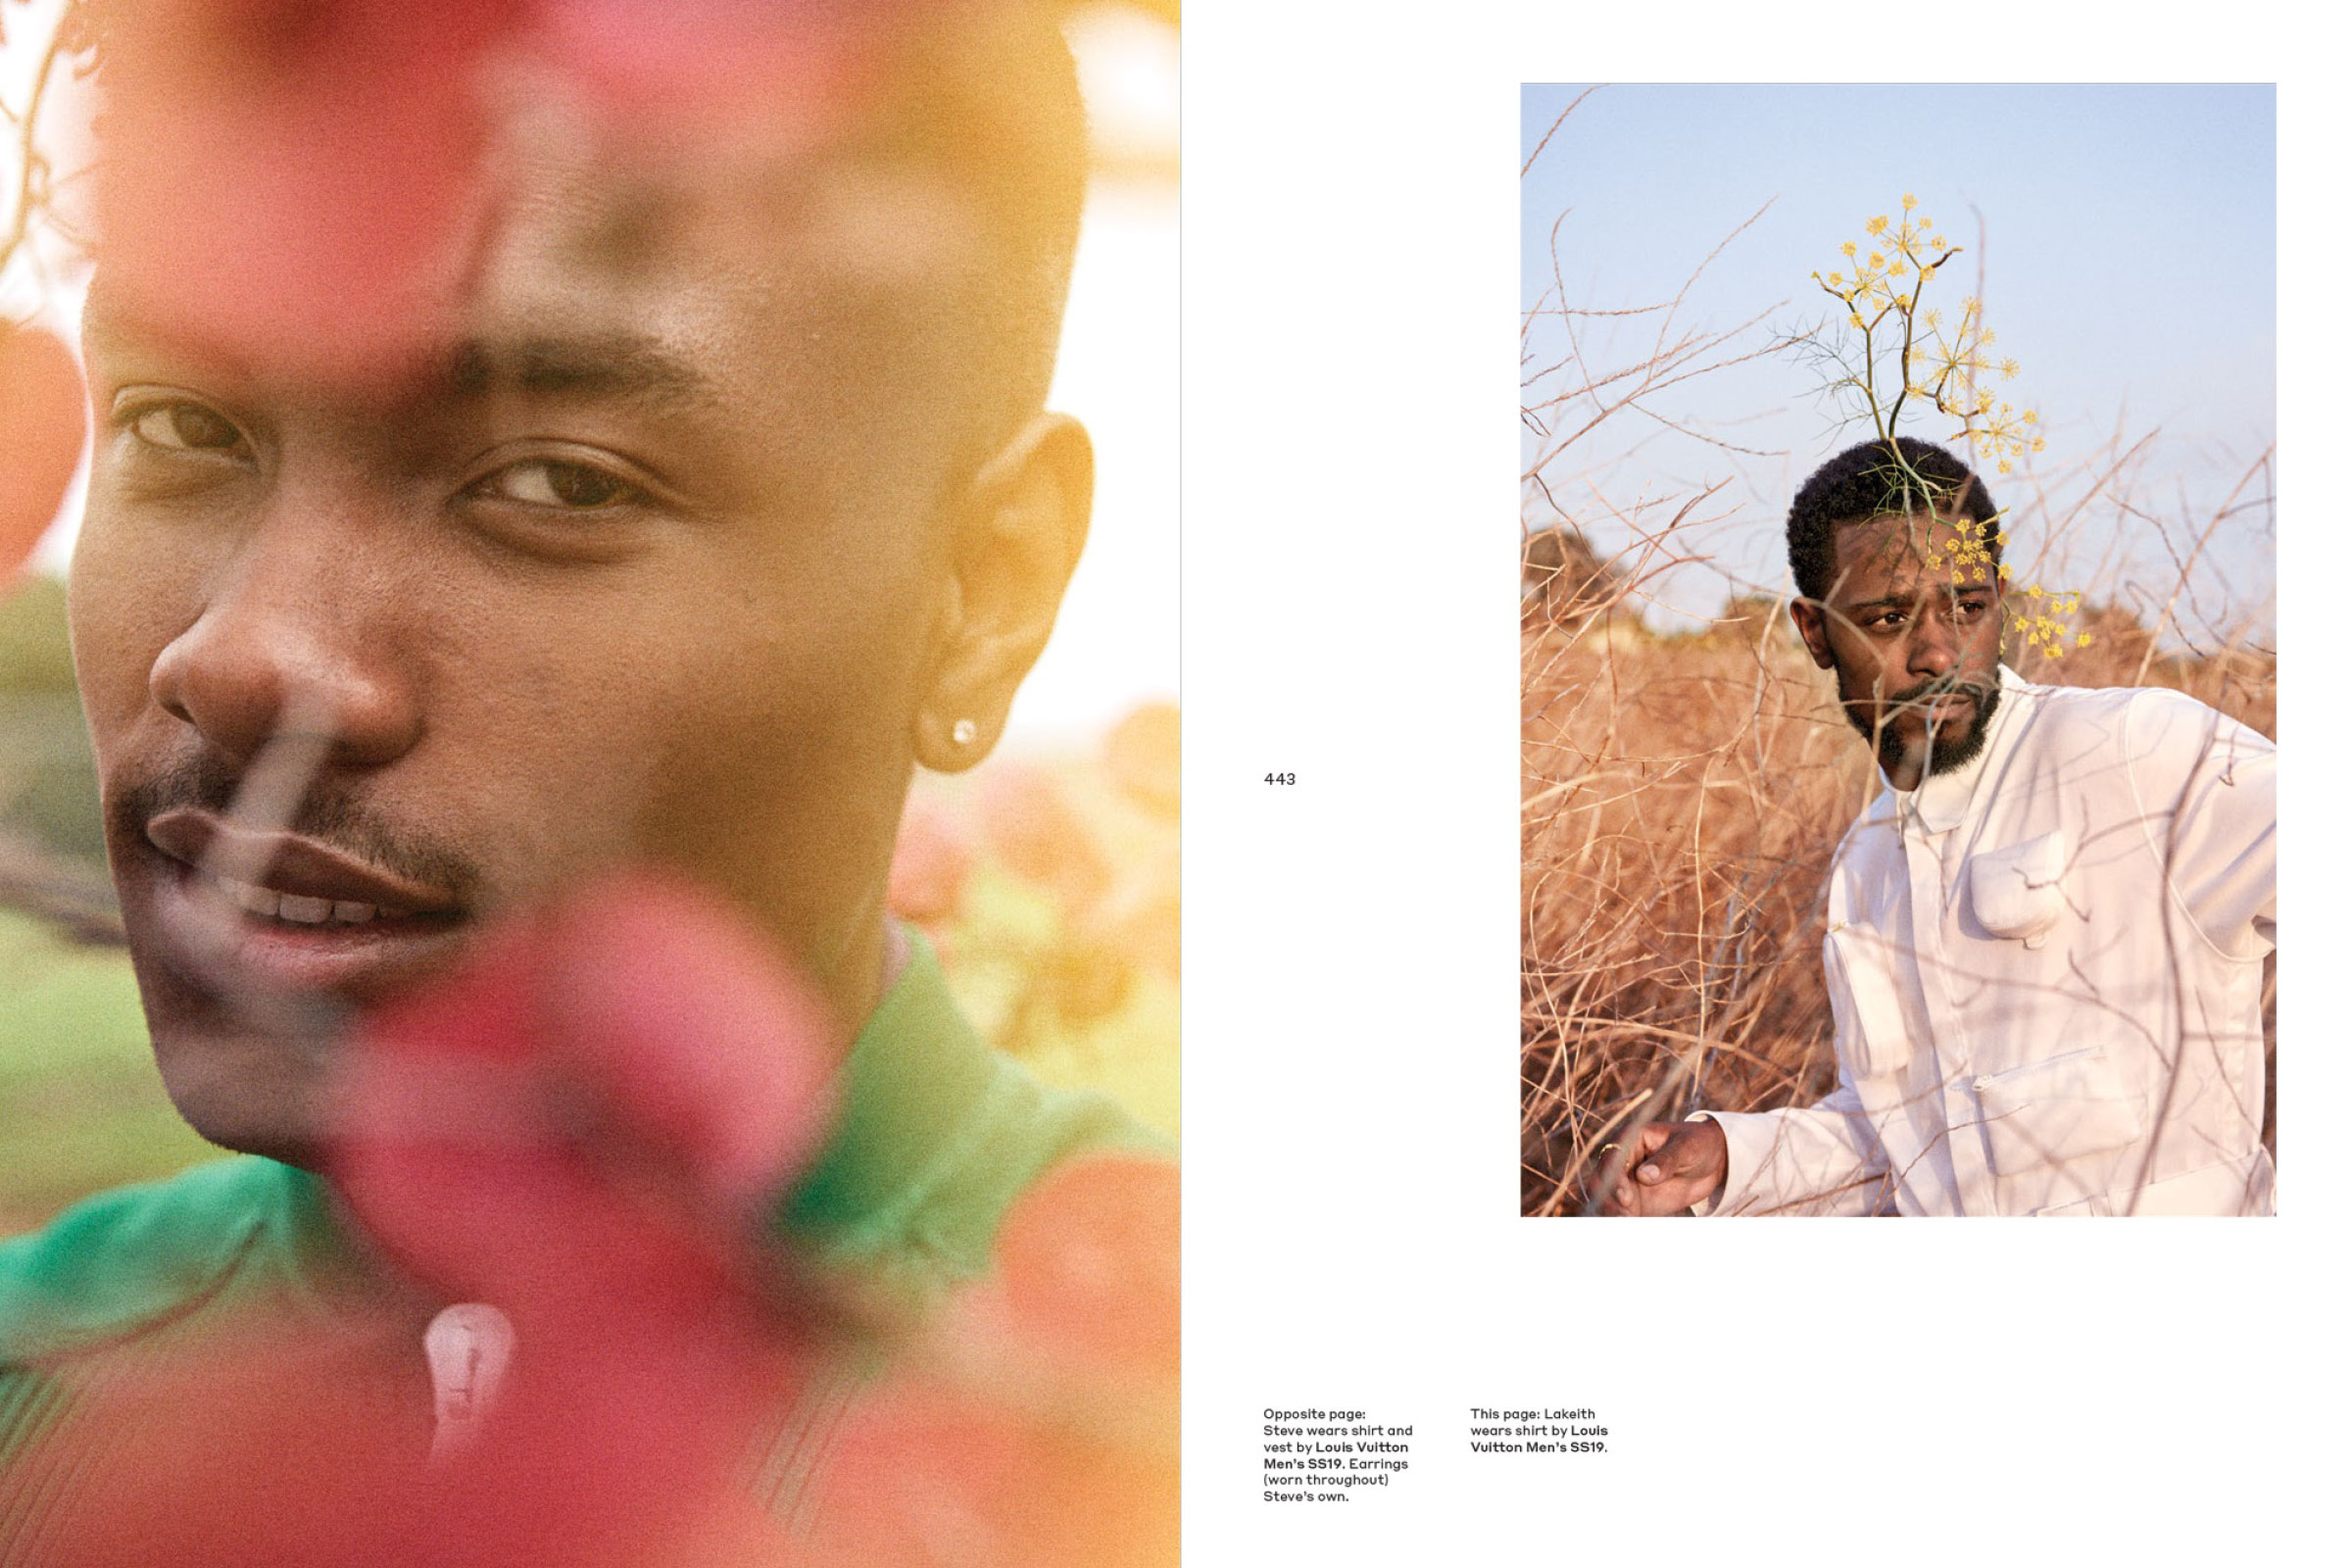 Steve Lacy, Syd, and Lakeith Stanfield by Ryan McGinley and Virgil Abloh